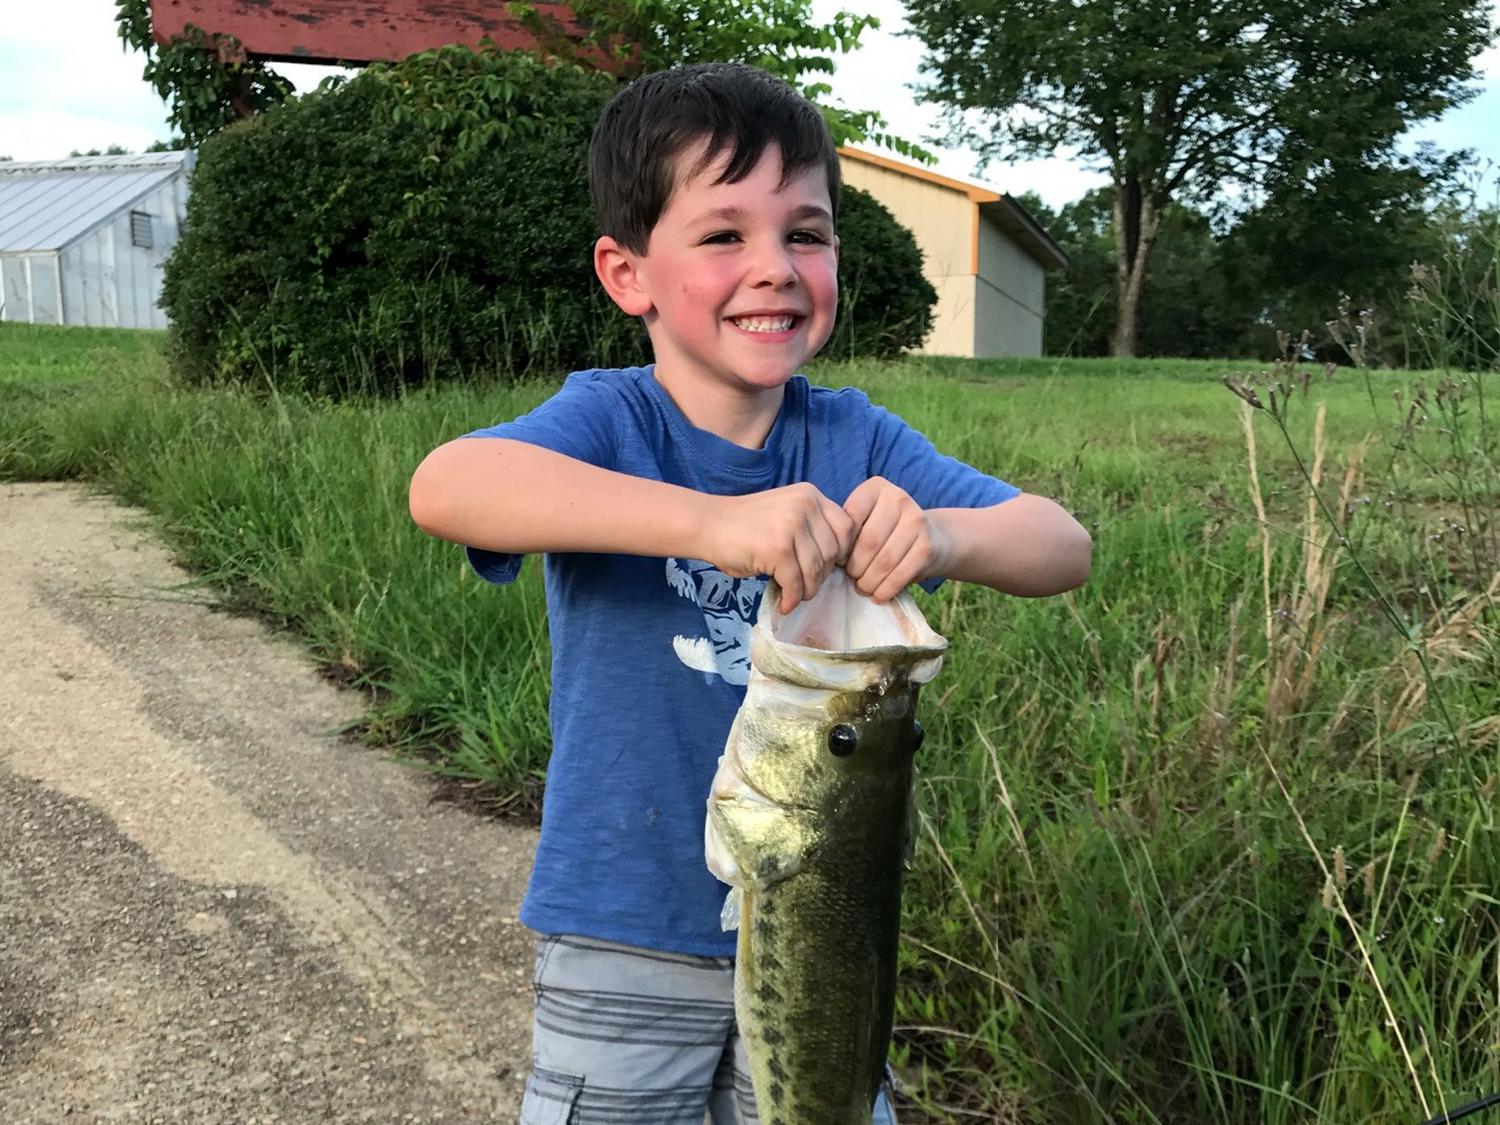 Young boy in blue shirt holding large fish.